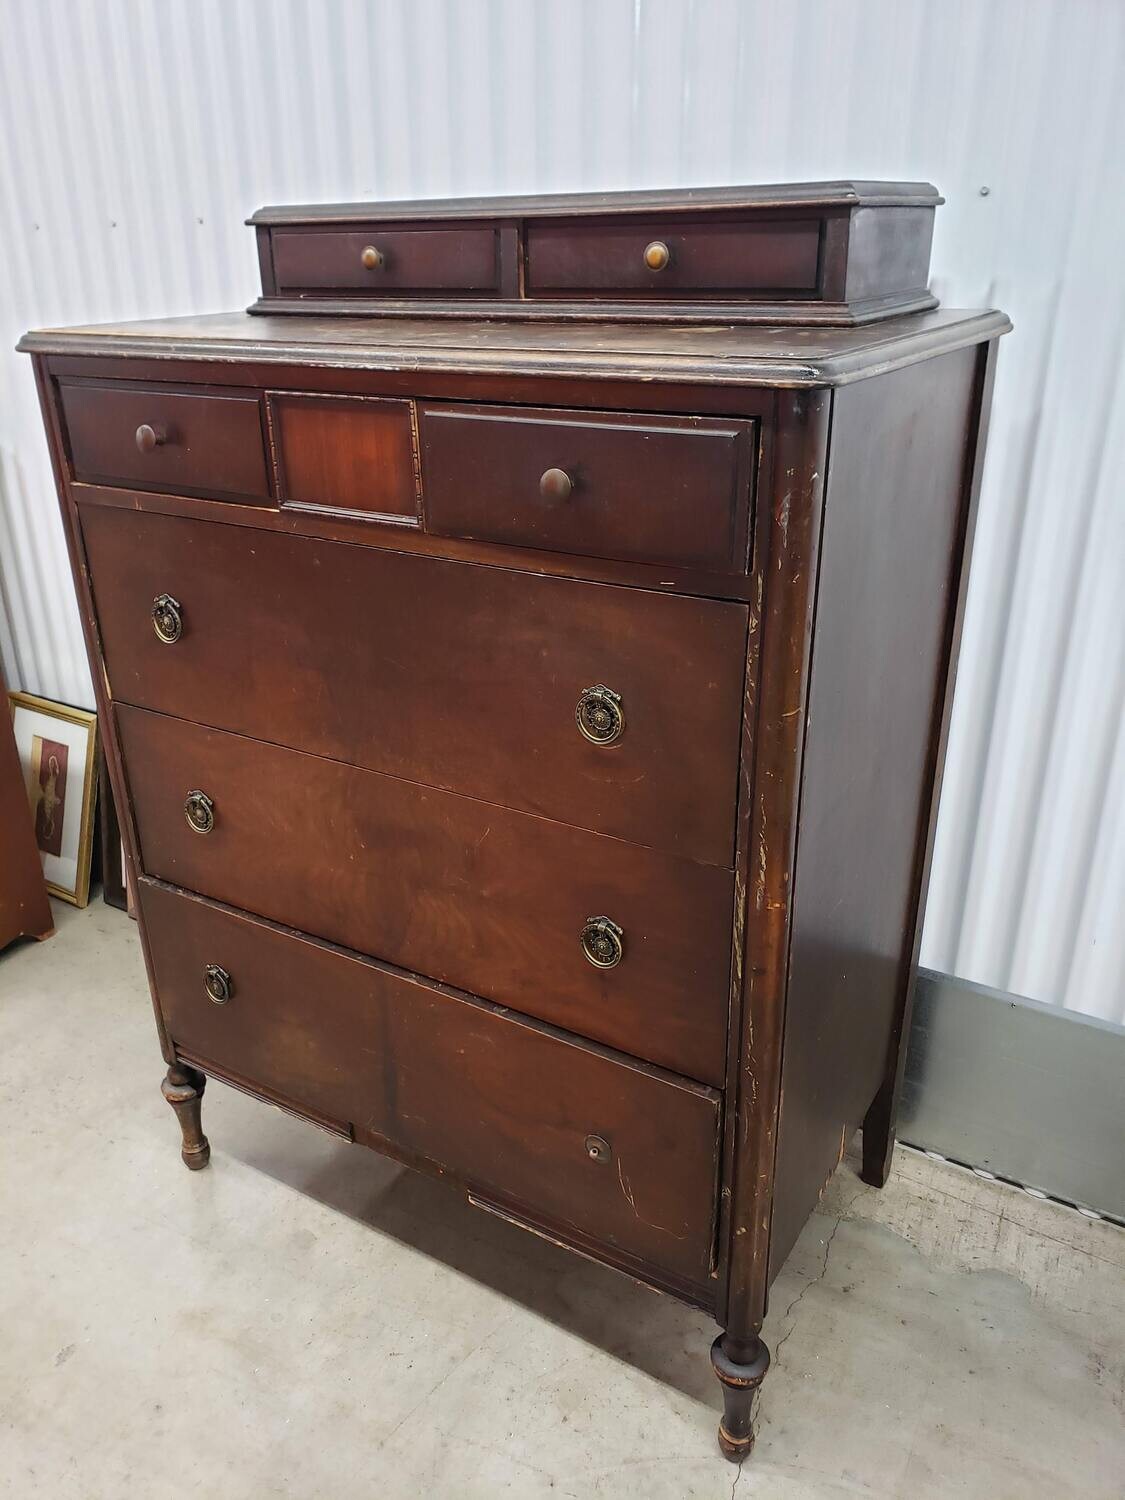 Antique Dresser with 3 deep drawers, Make-over Project! #2322